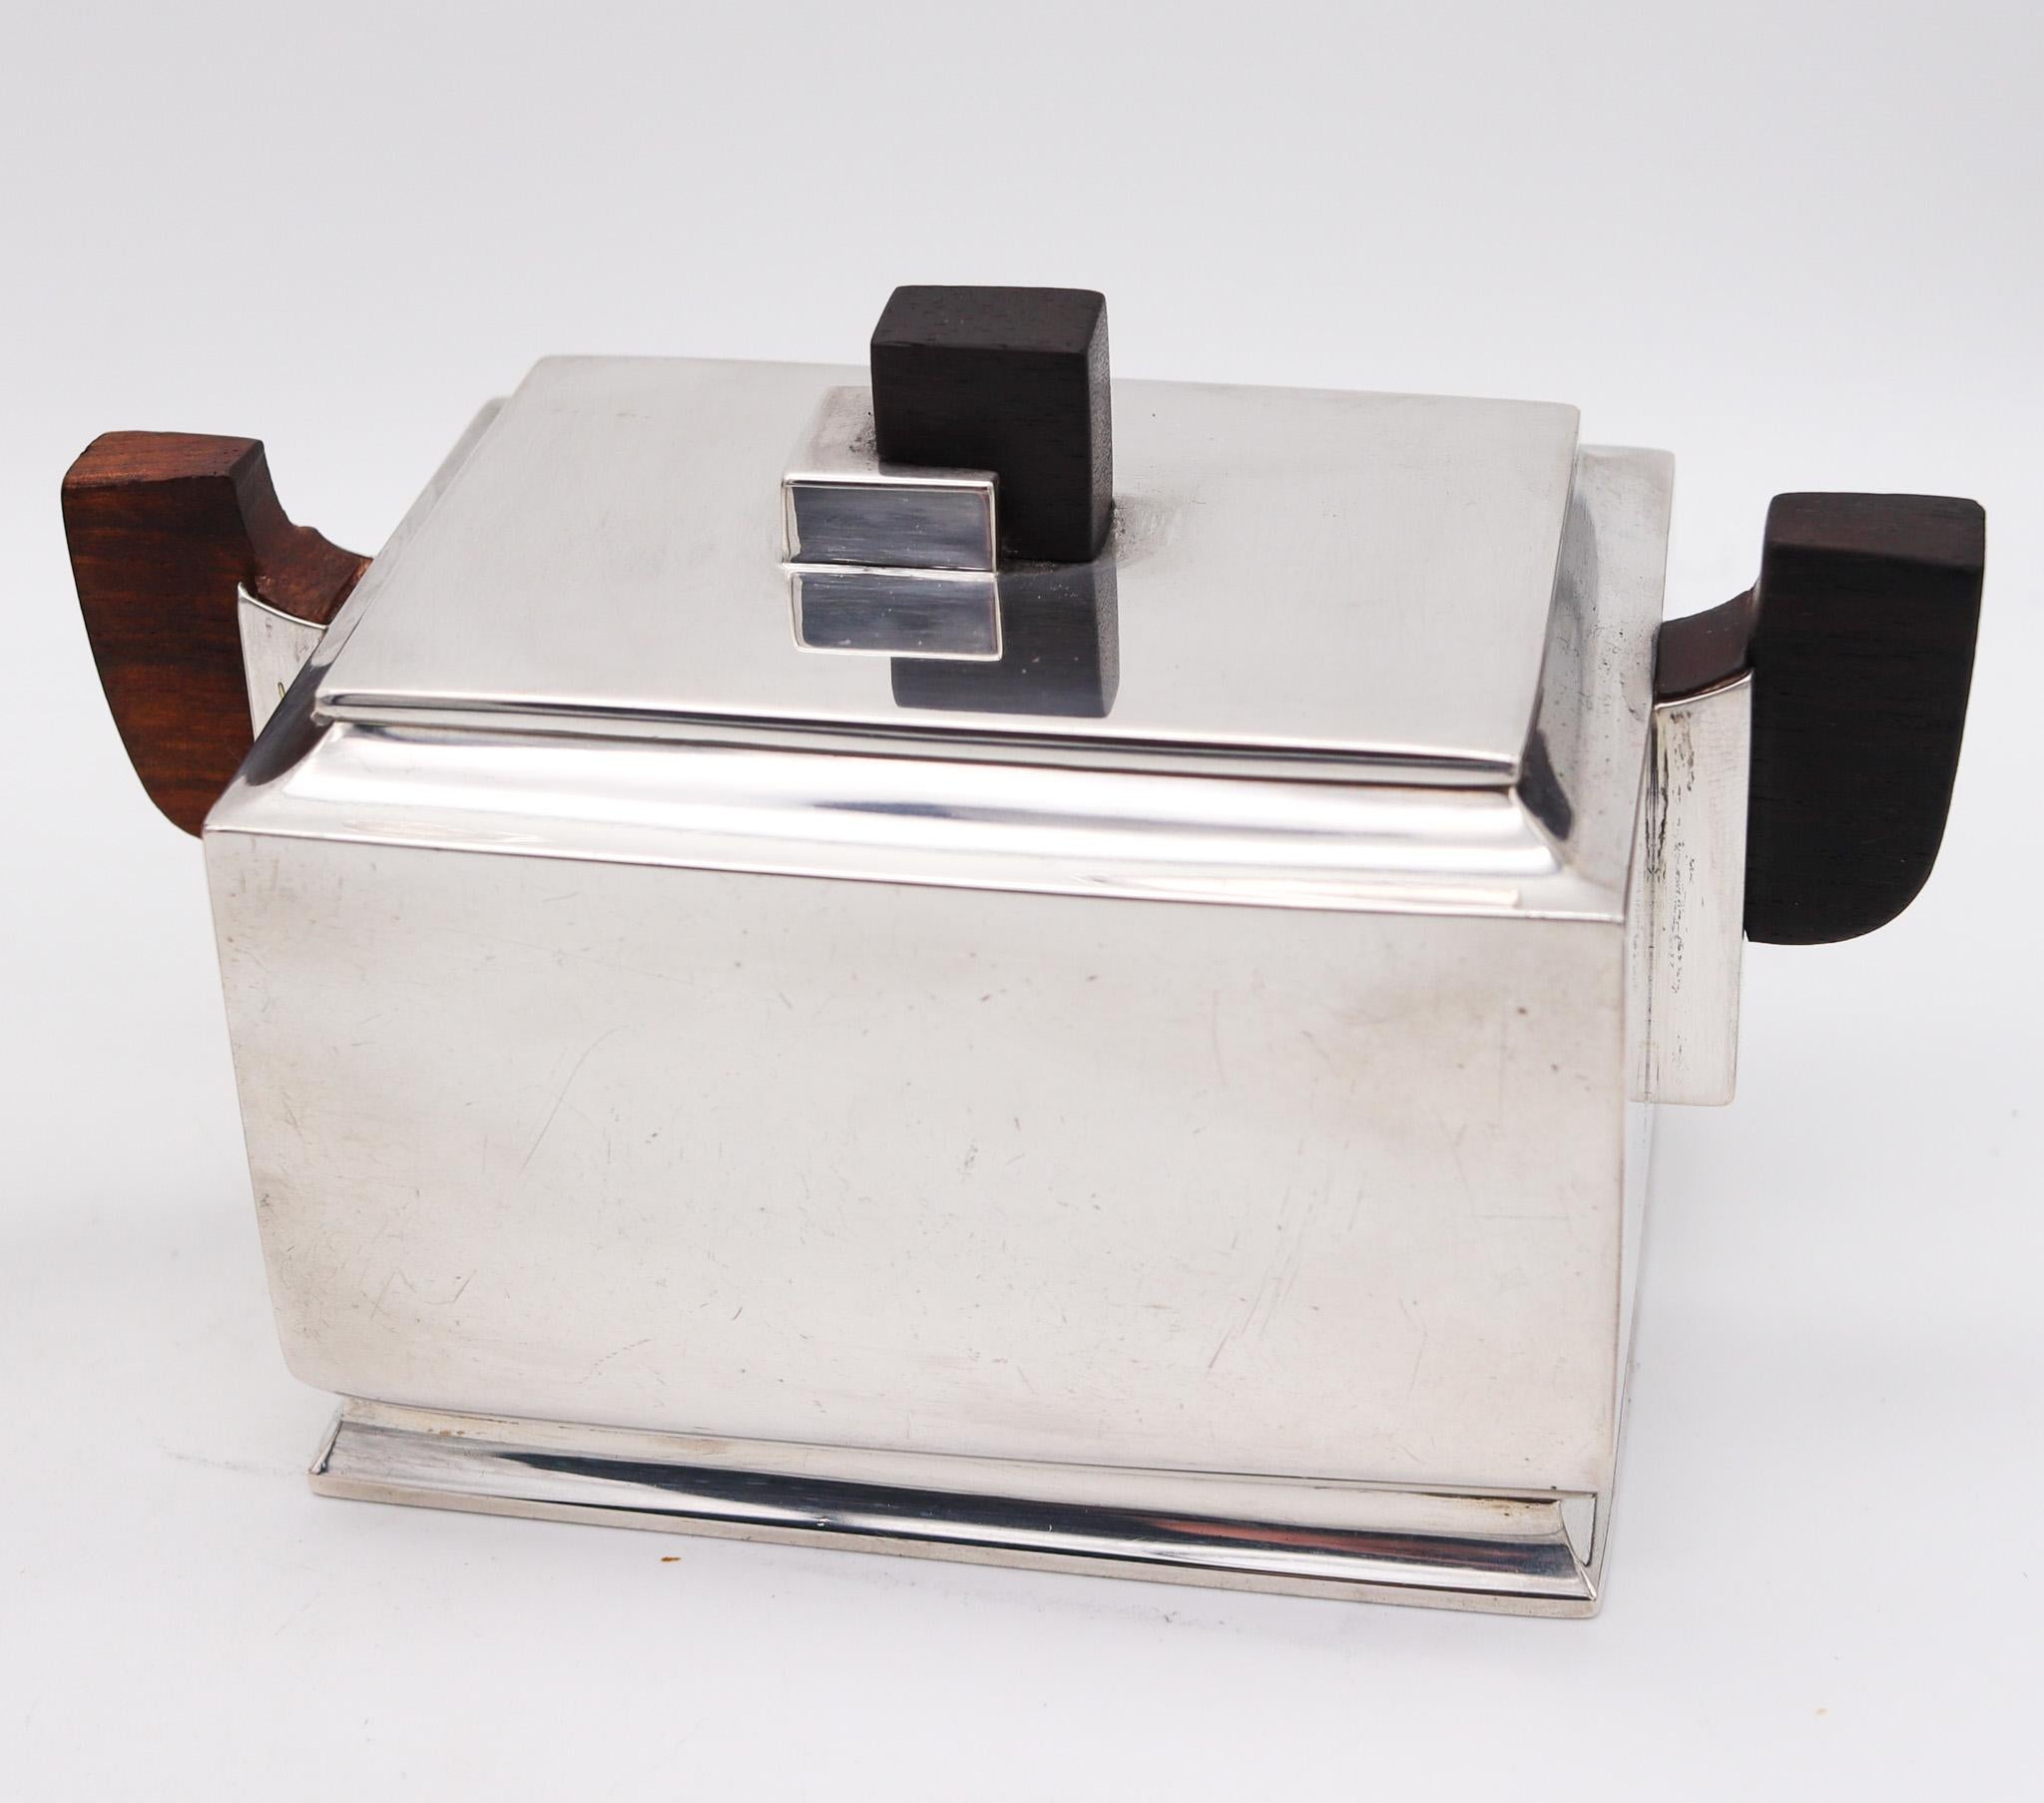 Sweden 1931 Art Deco Bauhaus Geometric Coffee Set In Sterling Silver And Ebony For Sale 2